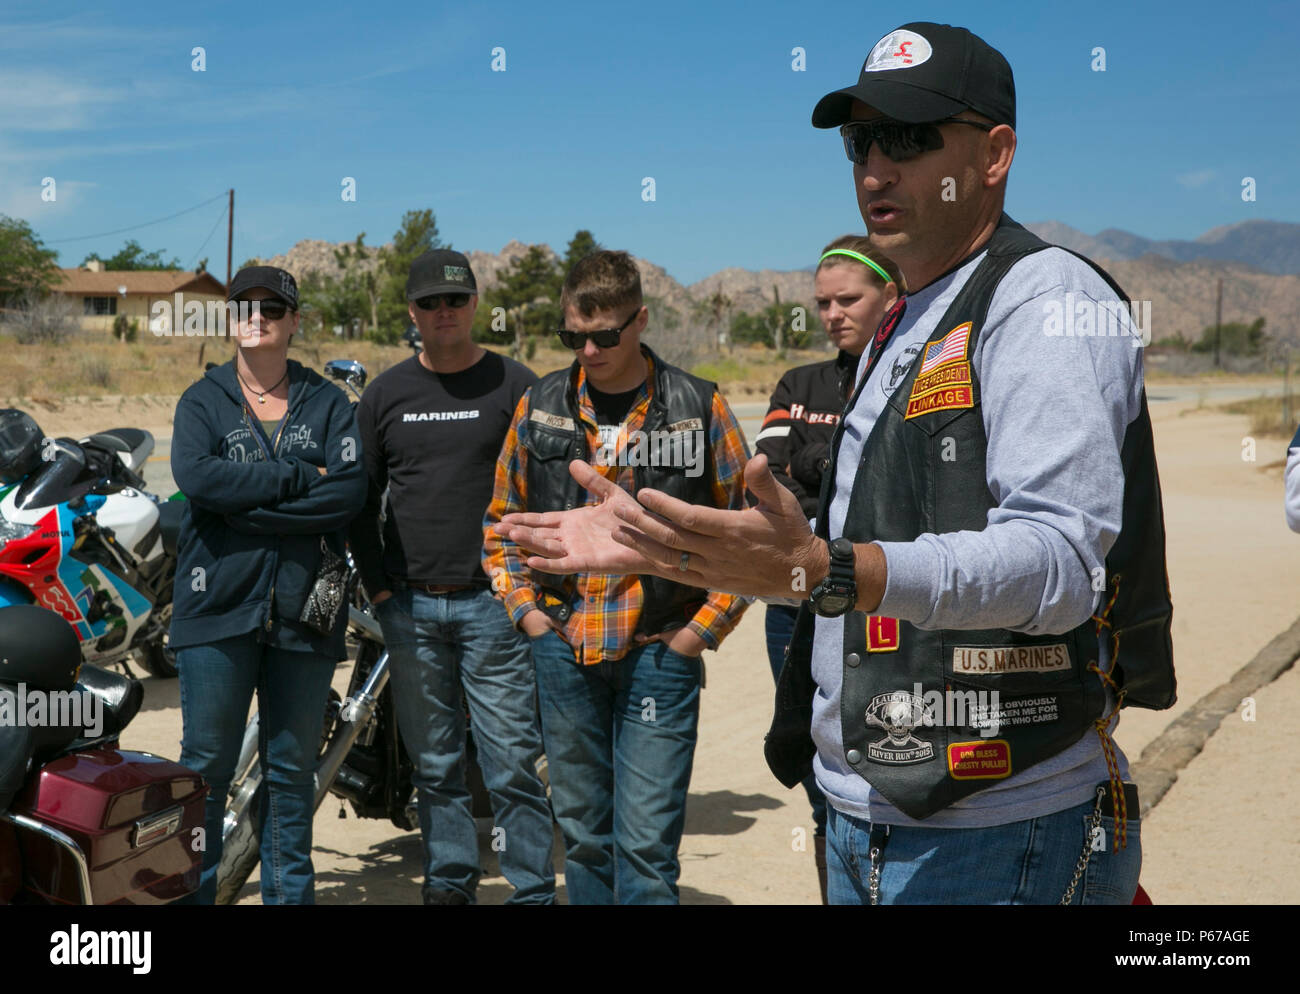 Master Sgt. Frank Edling, operations chief, 3rd Assault Amphibian Battalion, talks to fellow motorcycle riders outside of Pappy and Harriet’s in Yucca Valley, Calif., during the Substance Abuse Program’s Freedom to Ride, Ride for Freedom Sober Motorcycle Ride May 20, 2016. More than 40 motorcycle riders, including Marines and sailors, veterans and community members, attended the event to raise awareness of the dangers of substance abuse. (Official Marine Corps photo by Lance Cpl. Dave Flores/Released) Stock Photo